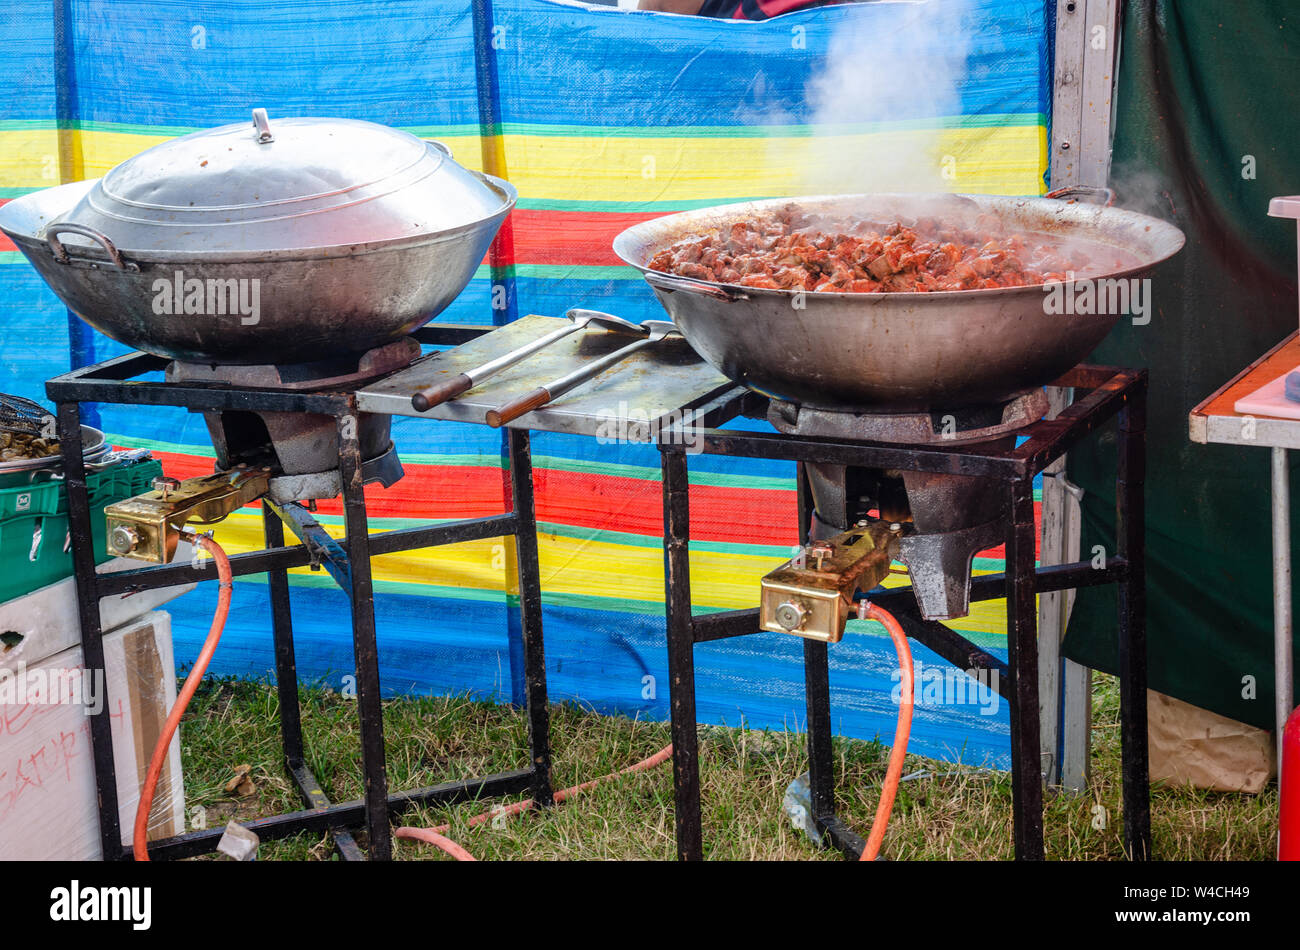 https://c8.alamy.com/comp/W4CH49/two-gas-stoves-used-for-cooking-by-a-catering-company-at-an-outdoor-event-W4CH49.jpg